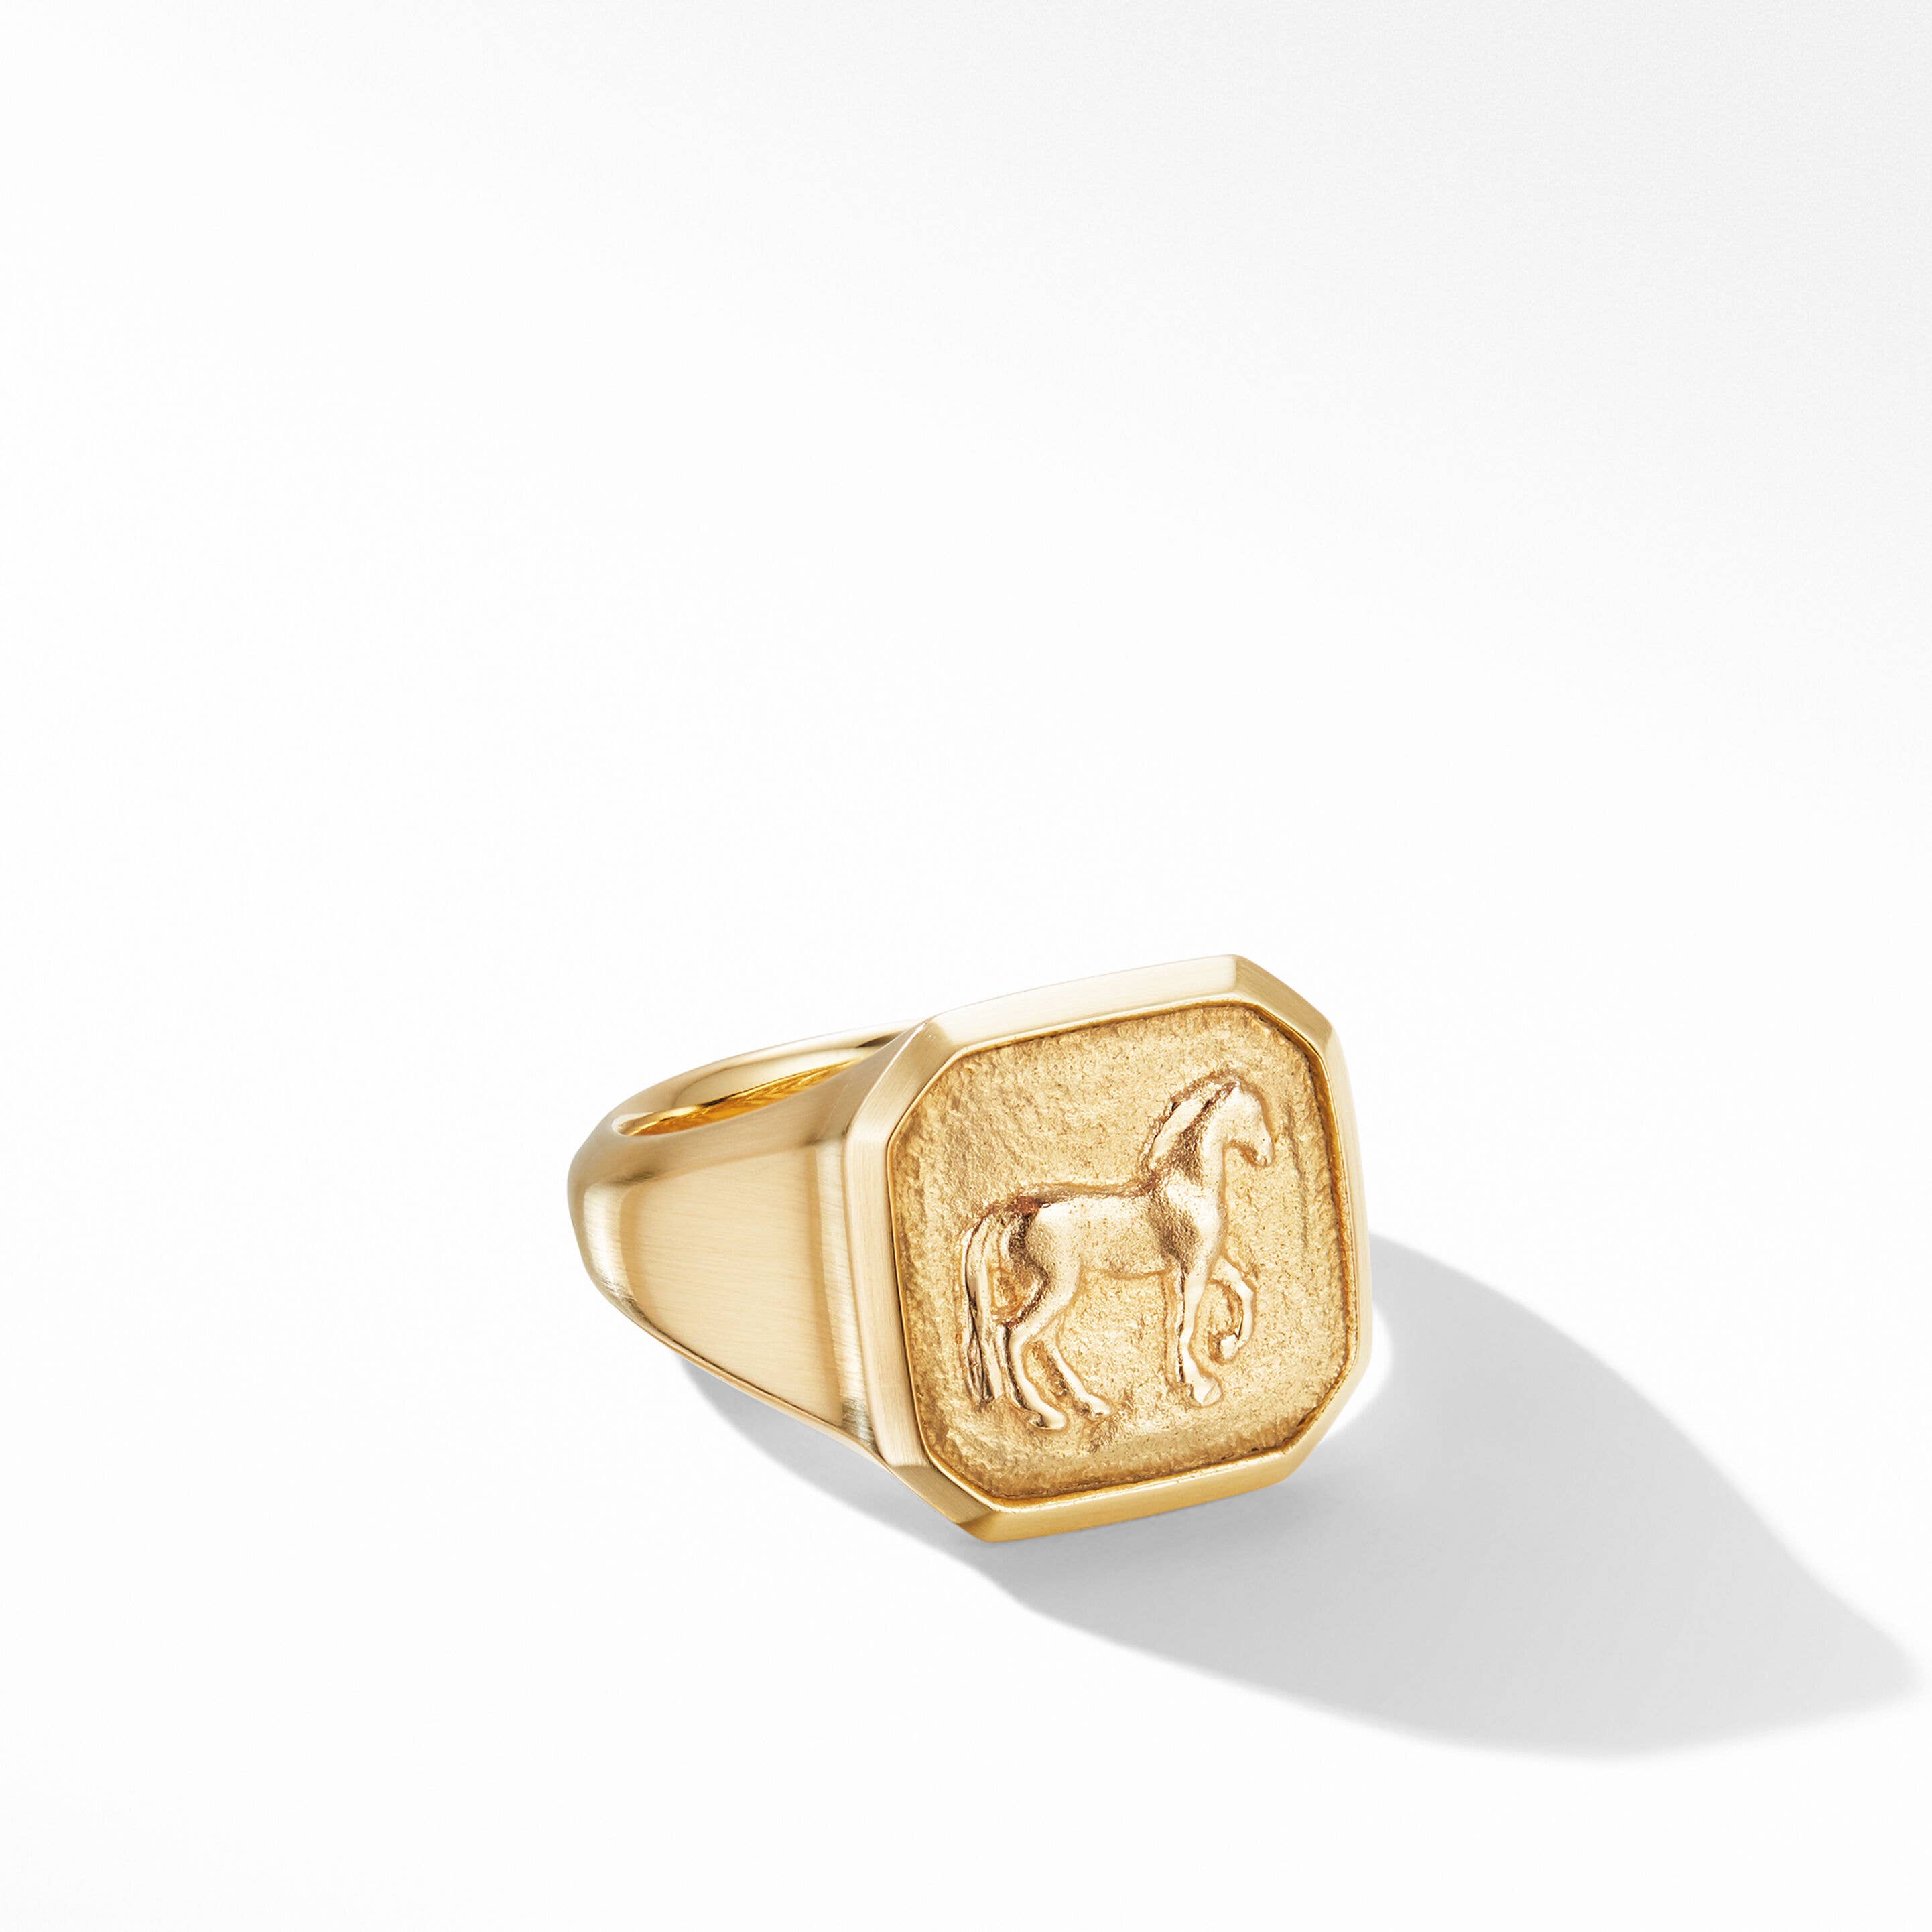 Petrvs® Horse Pinky Ring in 18K Yellow Gold